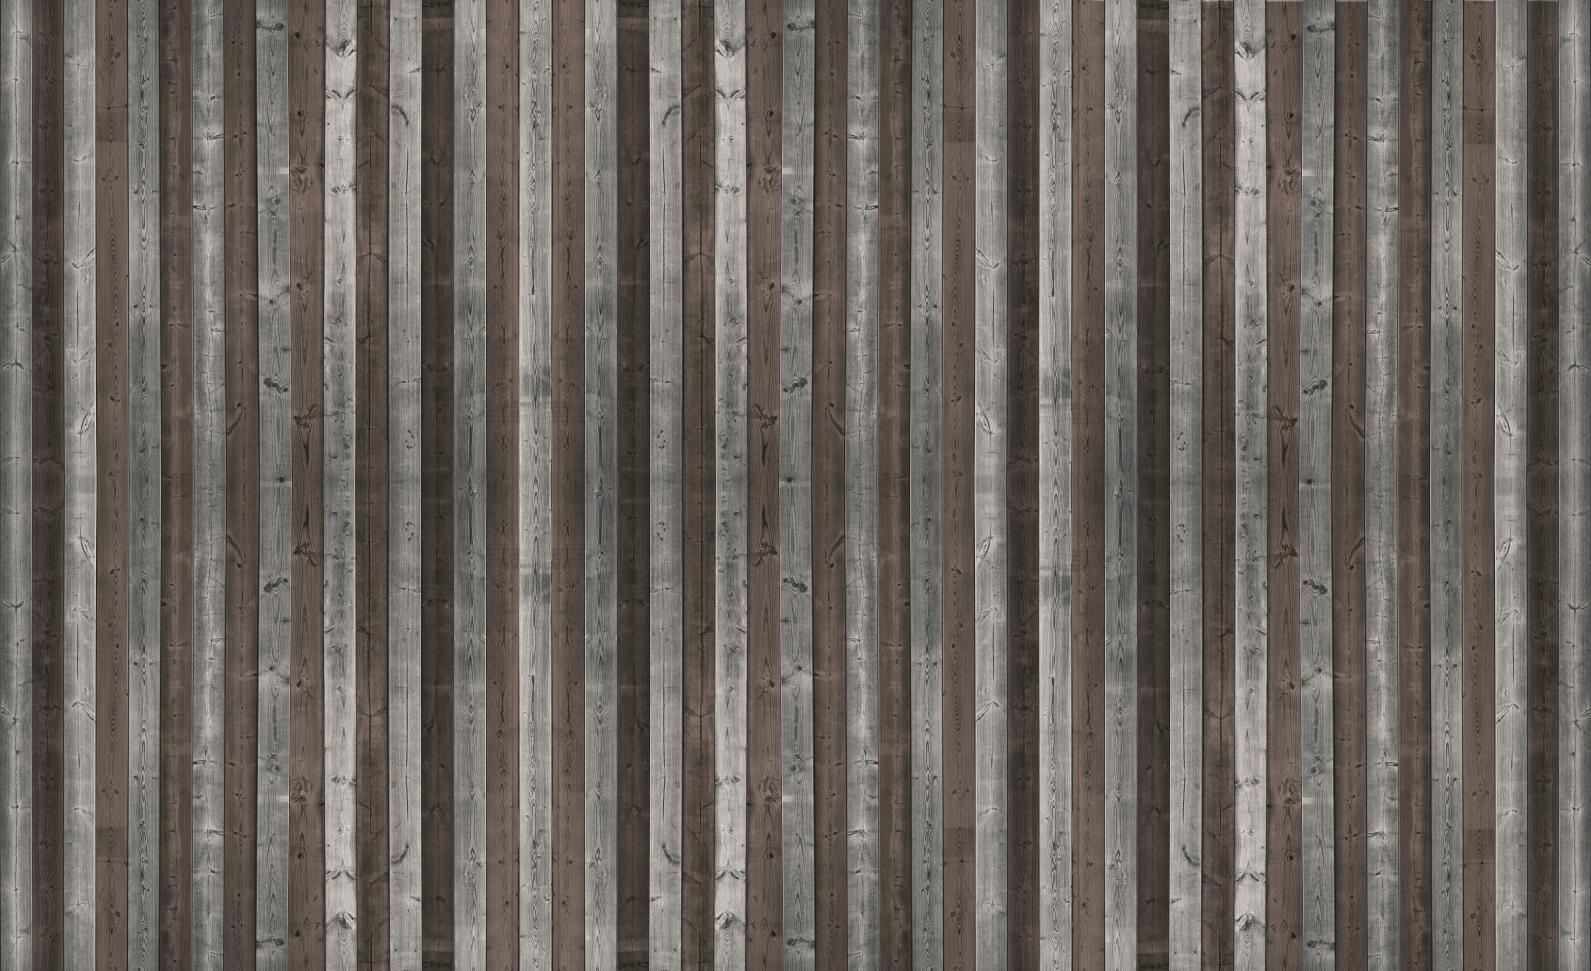 About Wood Planks Texture Photo Wallpaper Wall Mural Room 1090p